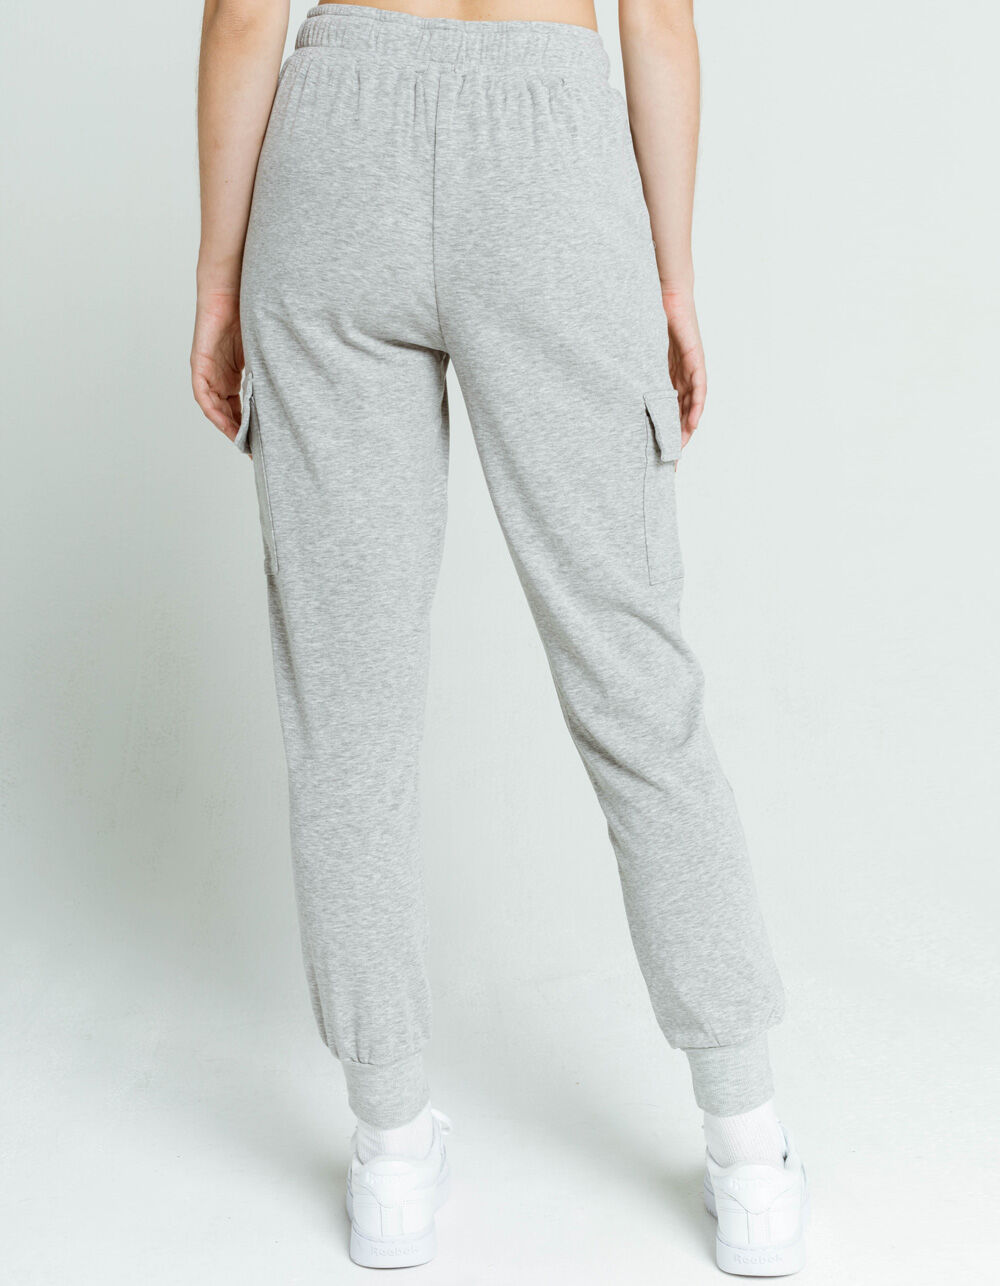 SKY AND SPARROW Cargo Womens Heather Gray Jogger Sweatpants - HEATHER ...